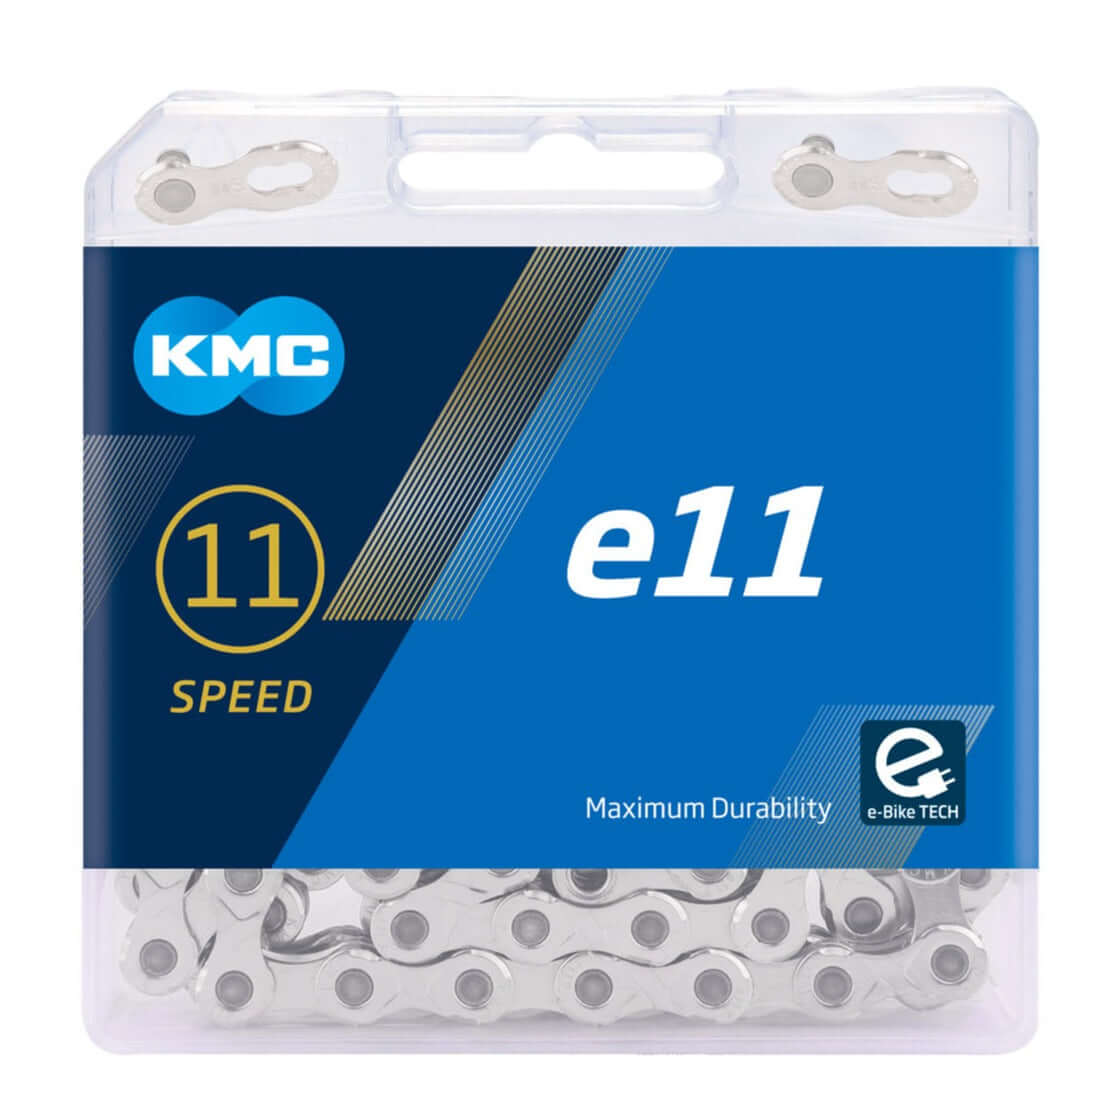 KMC - E11 11-Speed Bicycle Chain (136 Links)